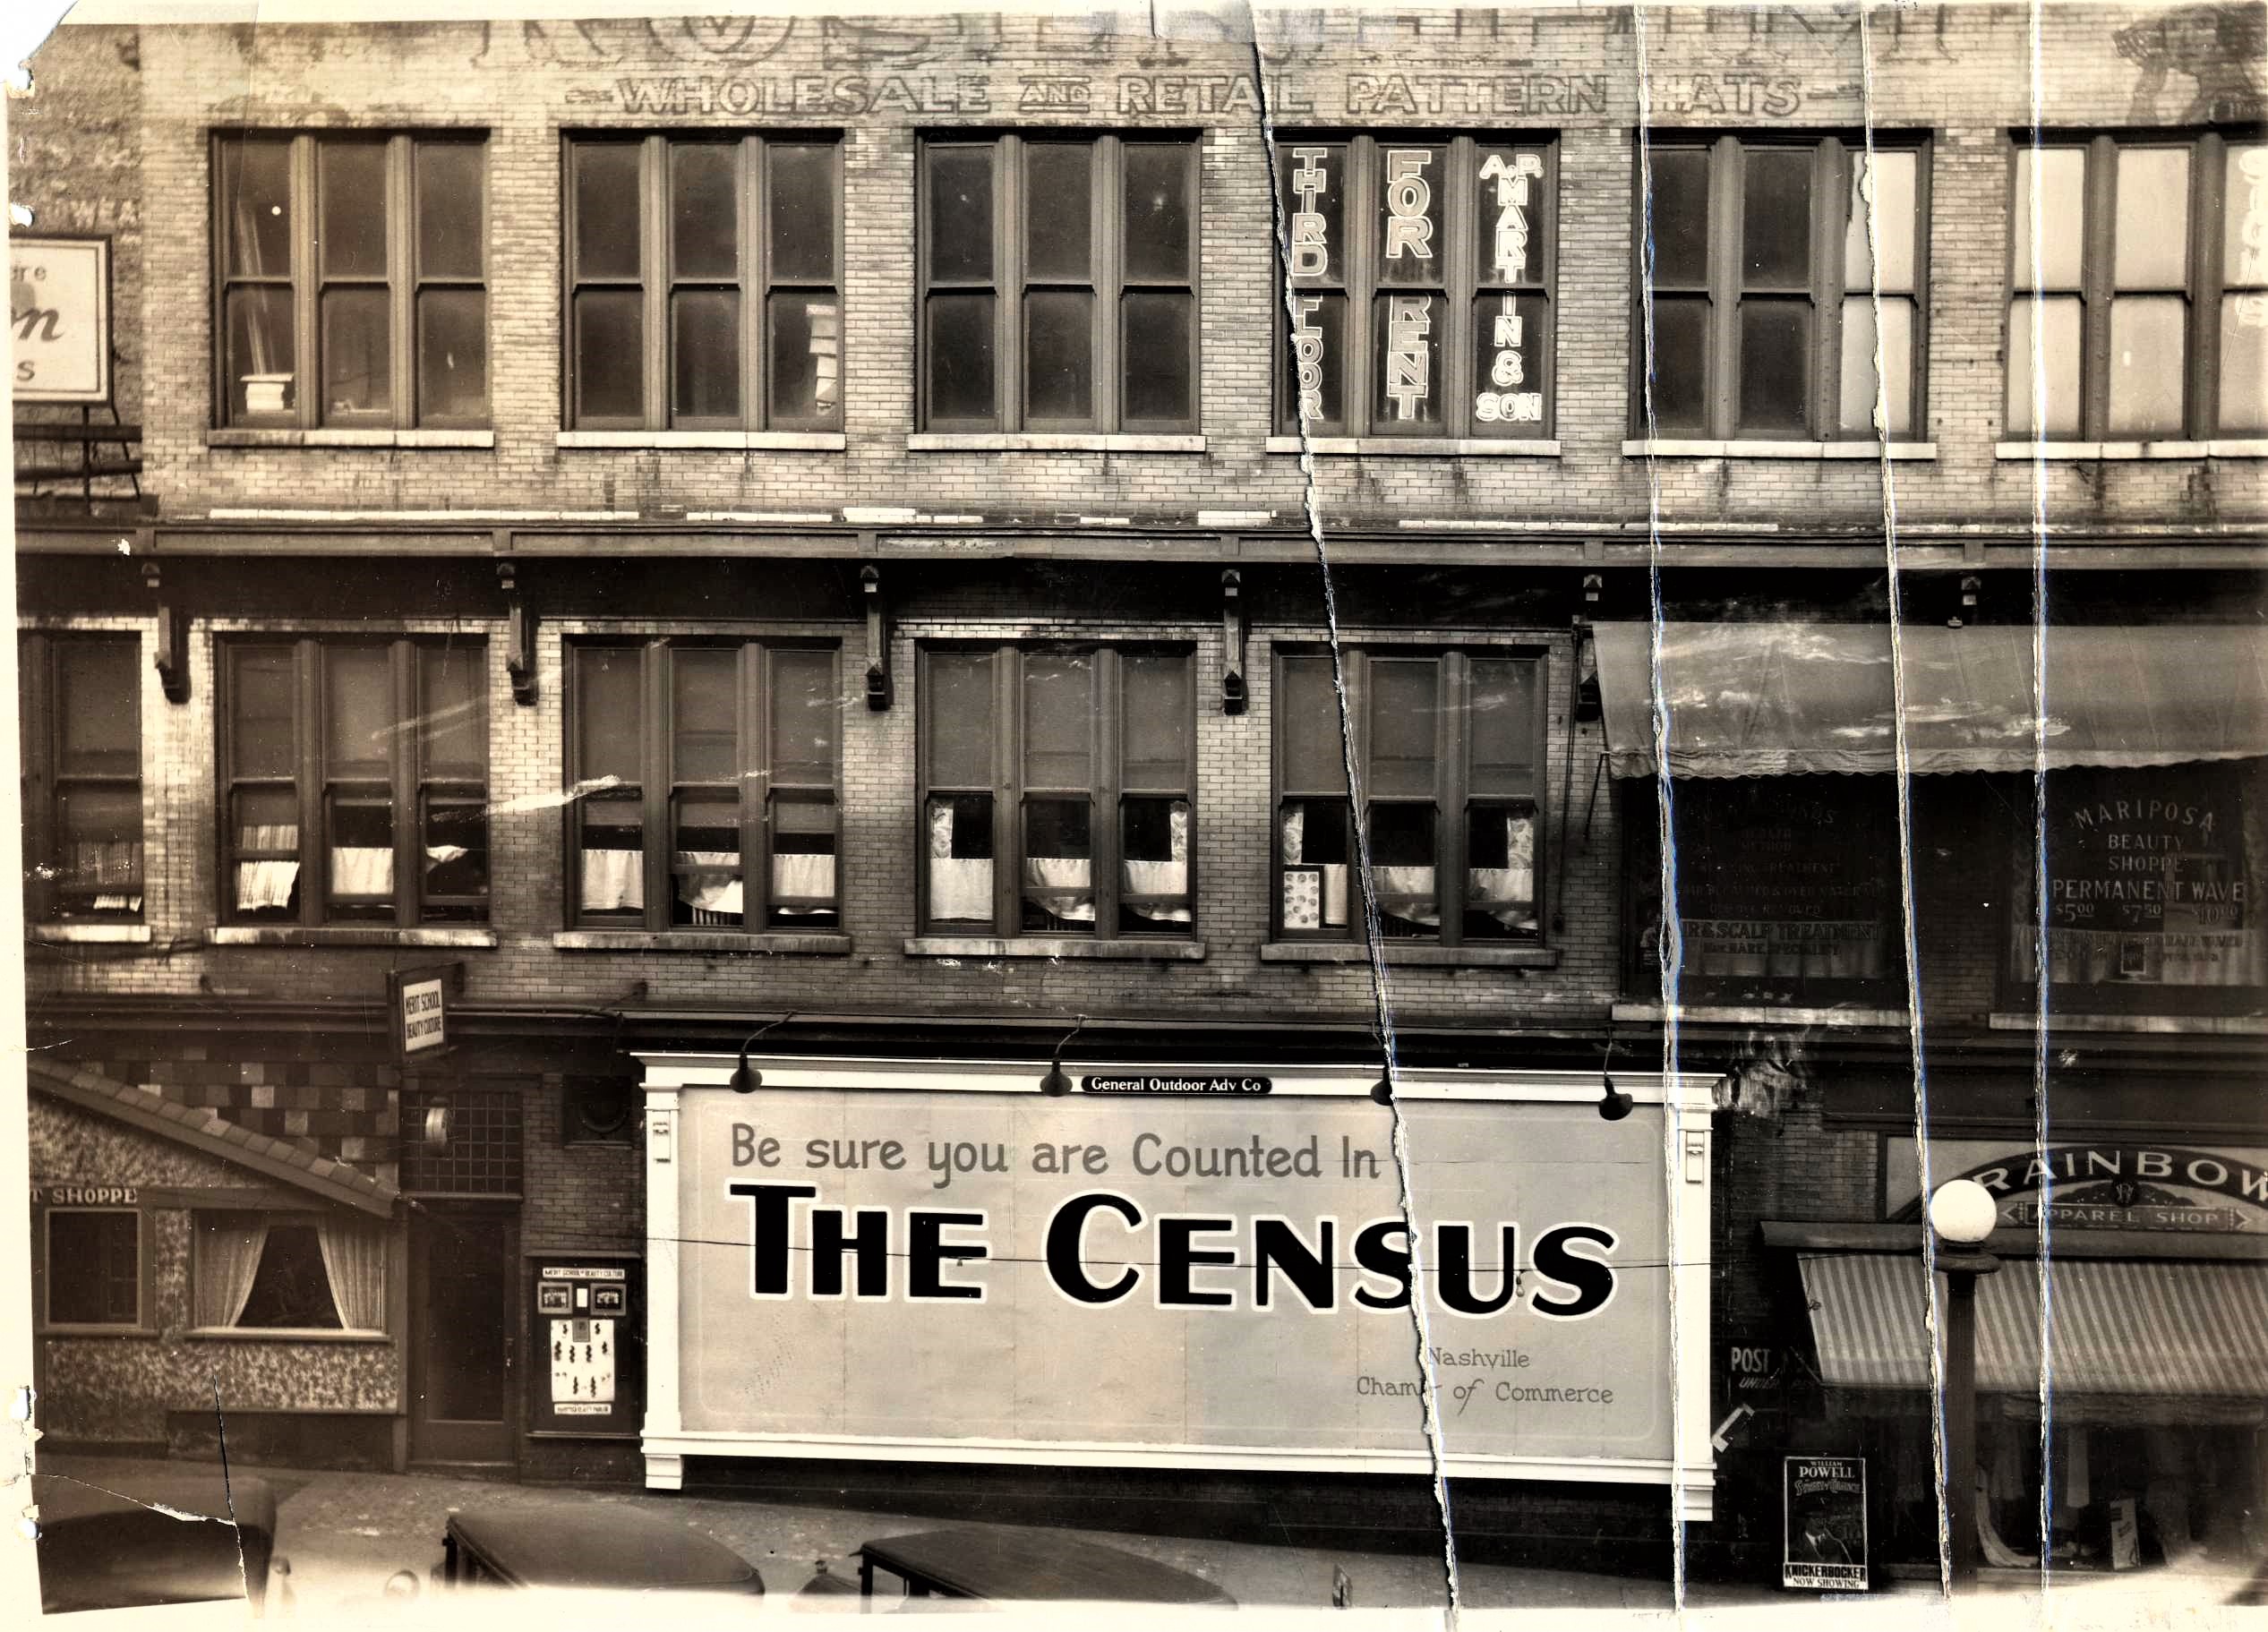 Chamber of Commerce Collection, billboard advertising the 1930 Census